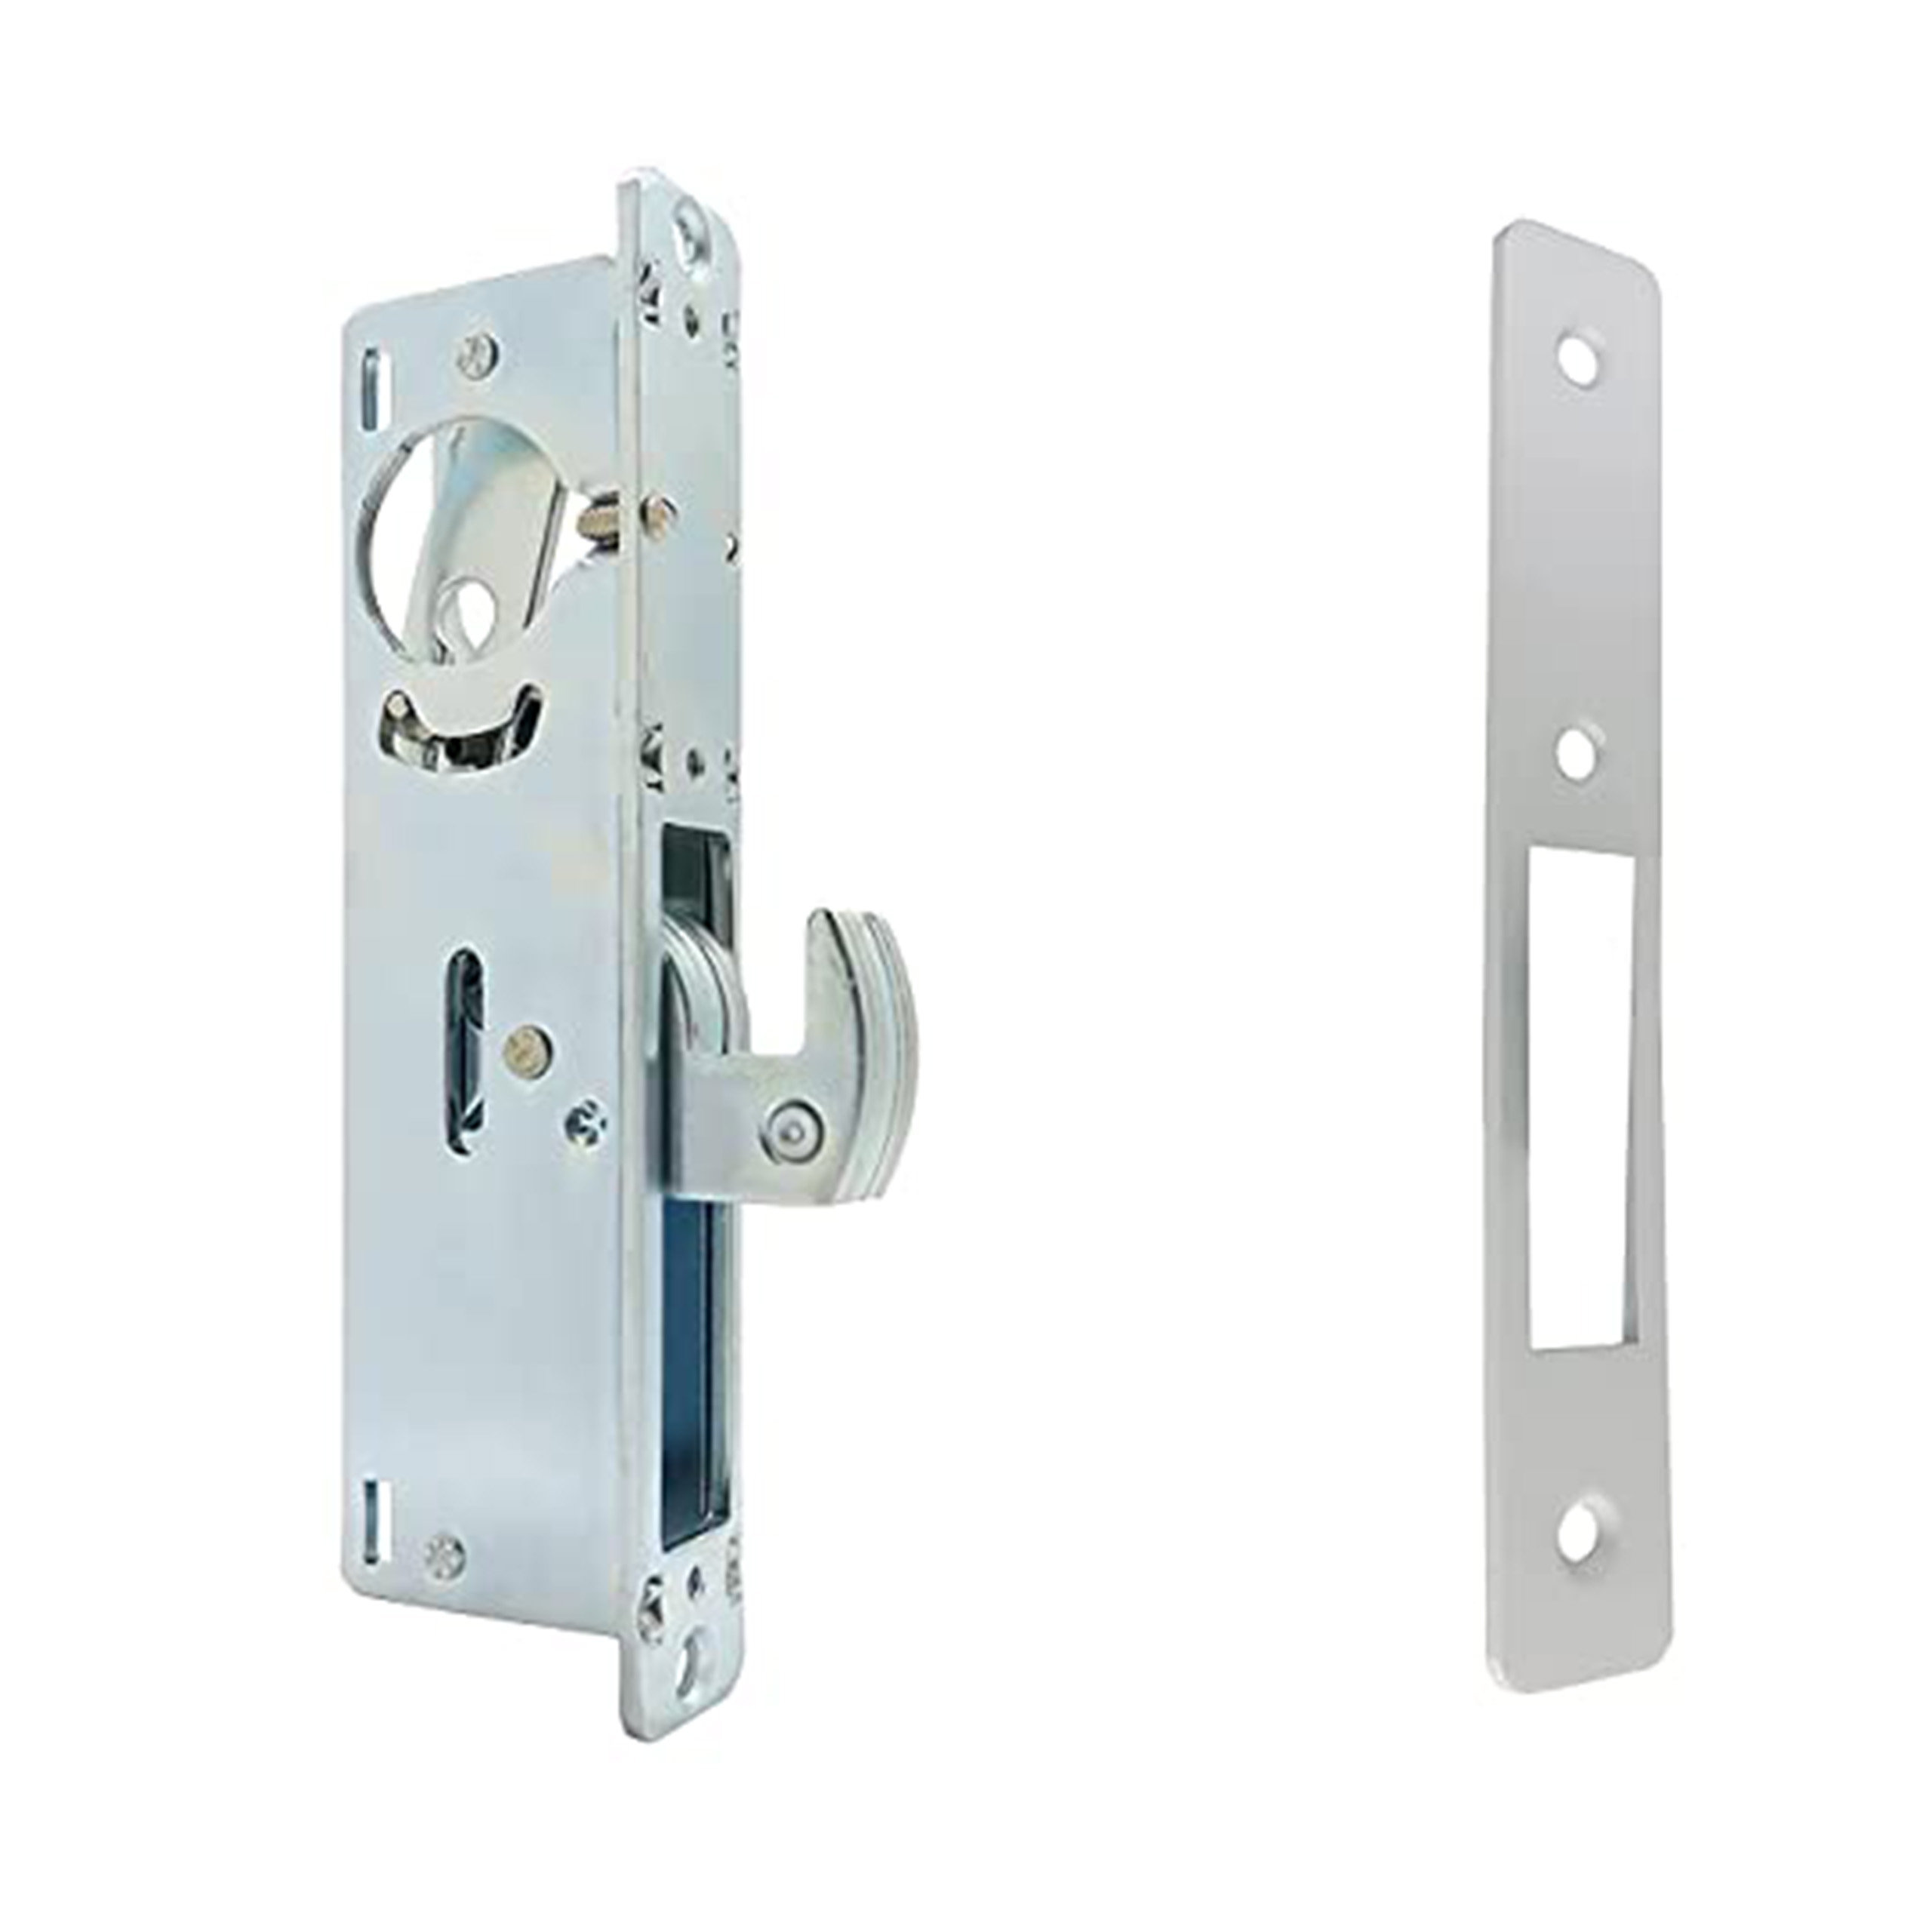 Standard Mortice 85mm, Door Latch for Internal and External Doors Mortise  Lock for Door Security and Privacy, Deadbolts -  Canada